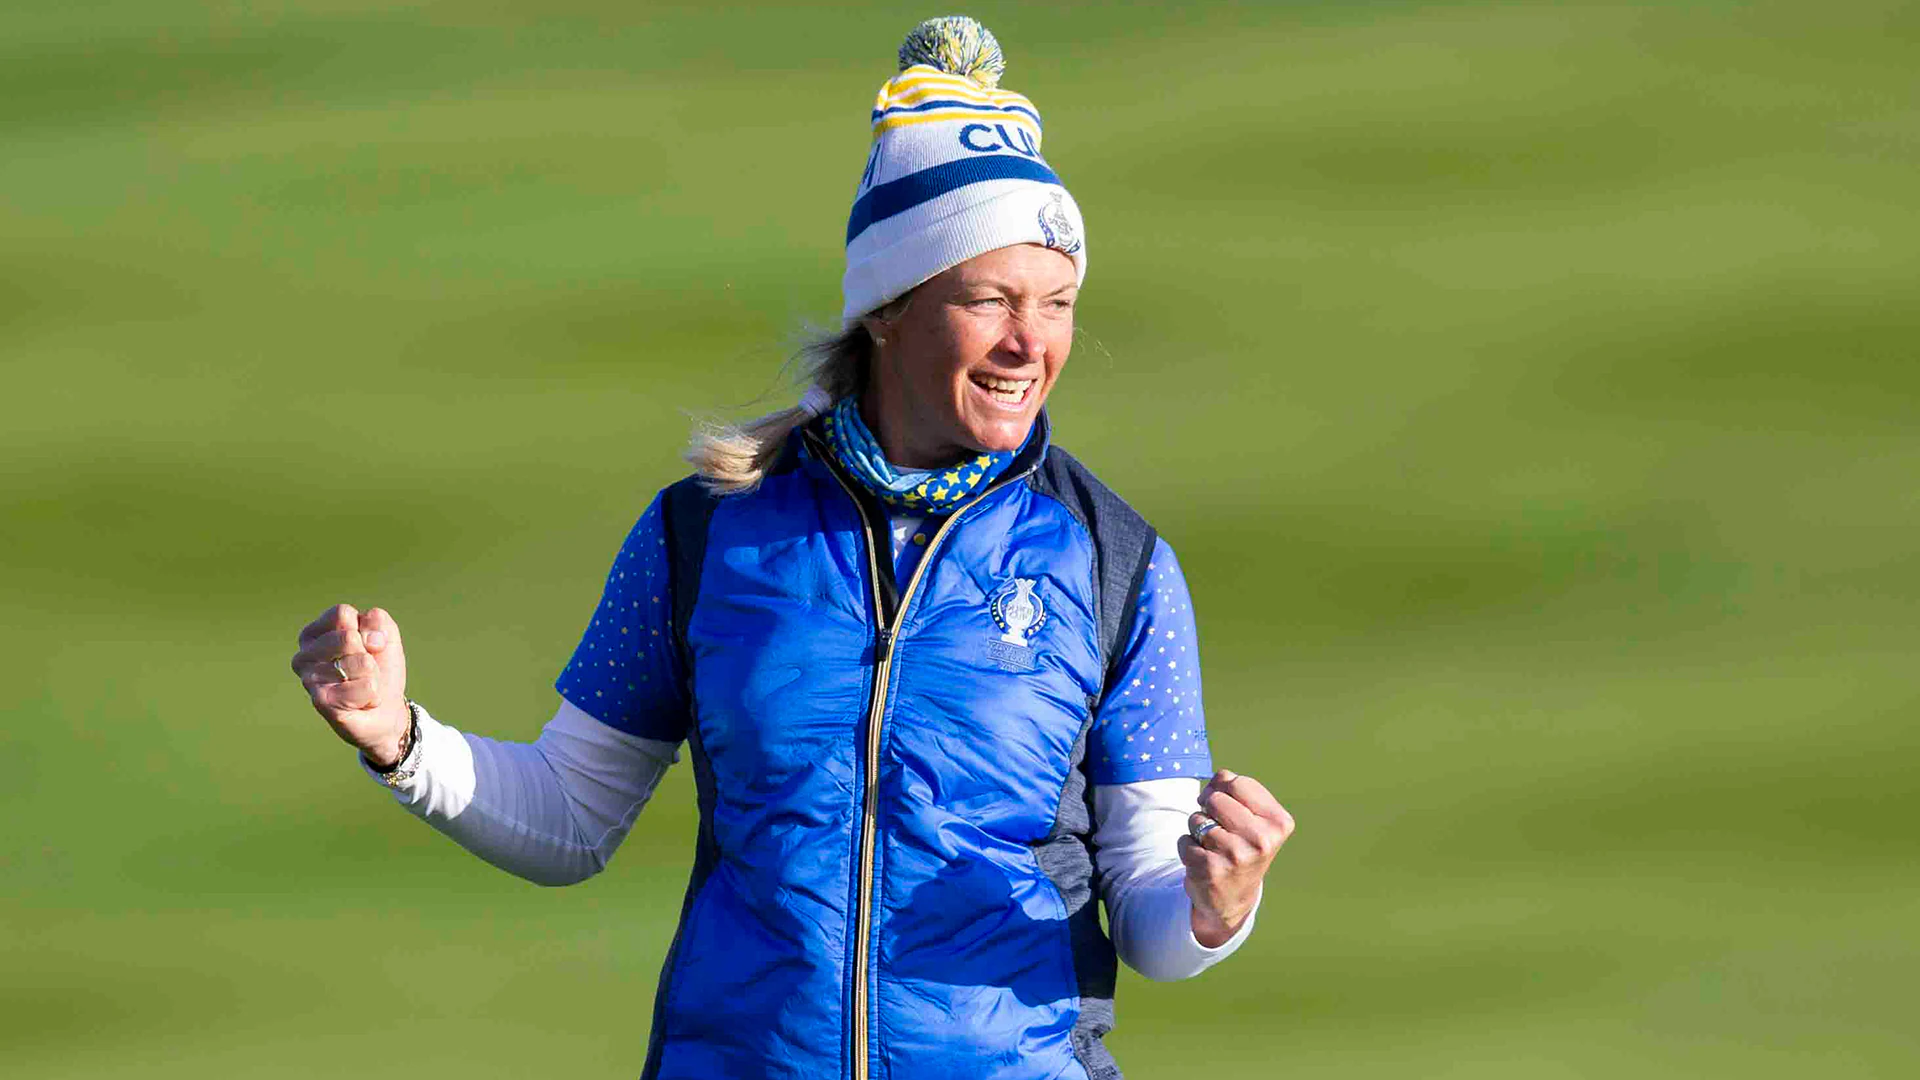 Suzann Pettersen, hero of the 2019 Solheim Cup, will captain Europeans in 2023